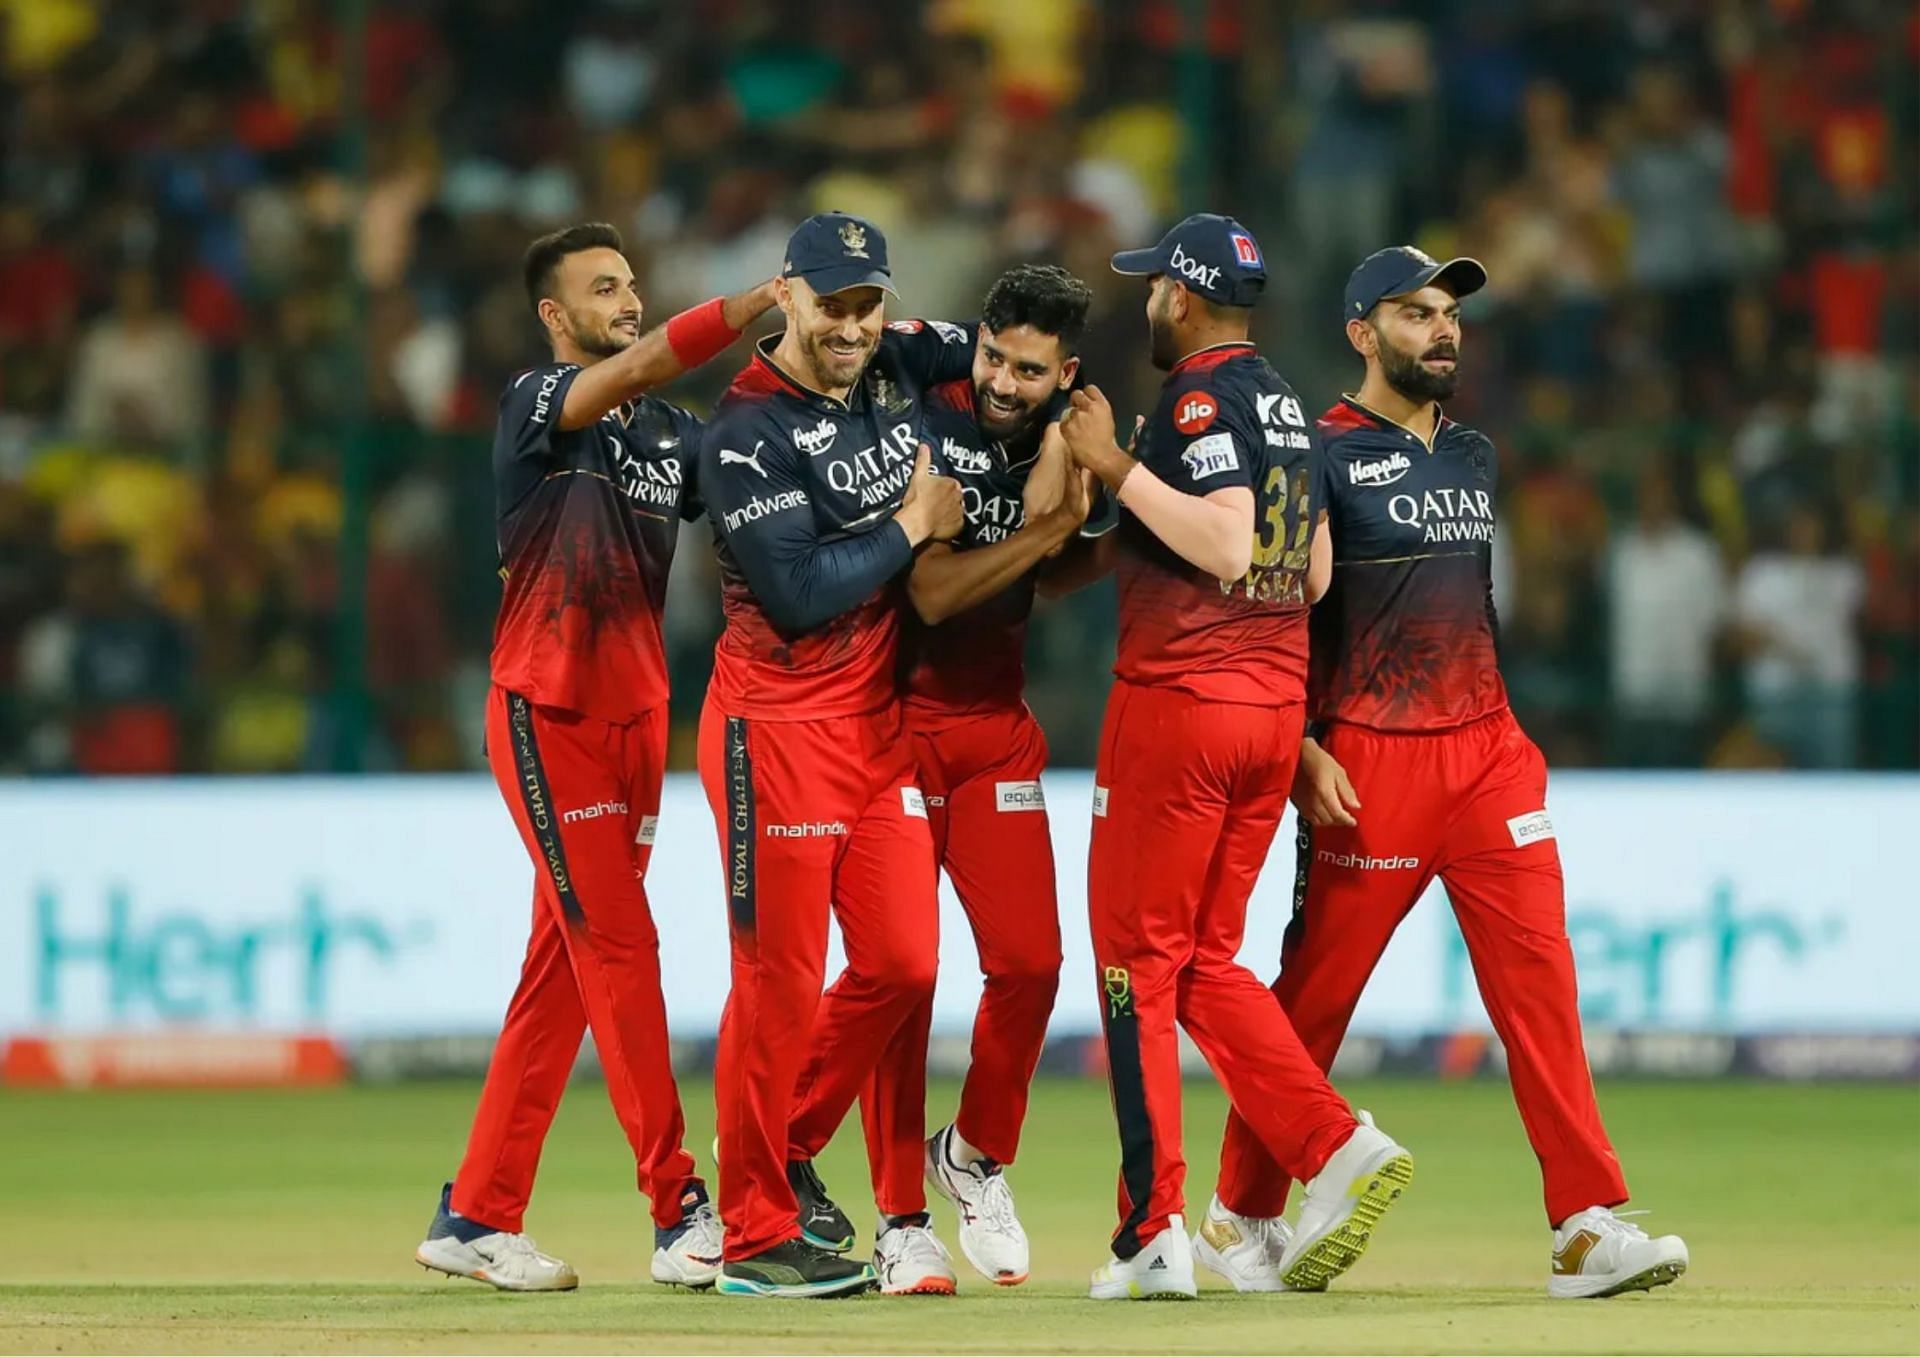 RCB and CSK played out a thriller but the former couldn